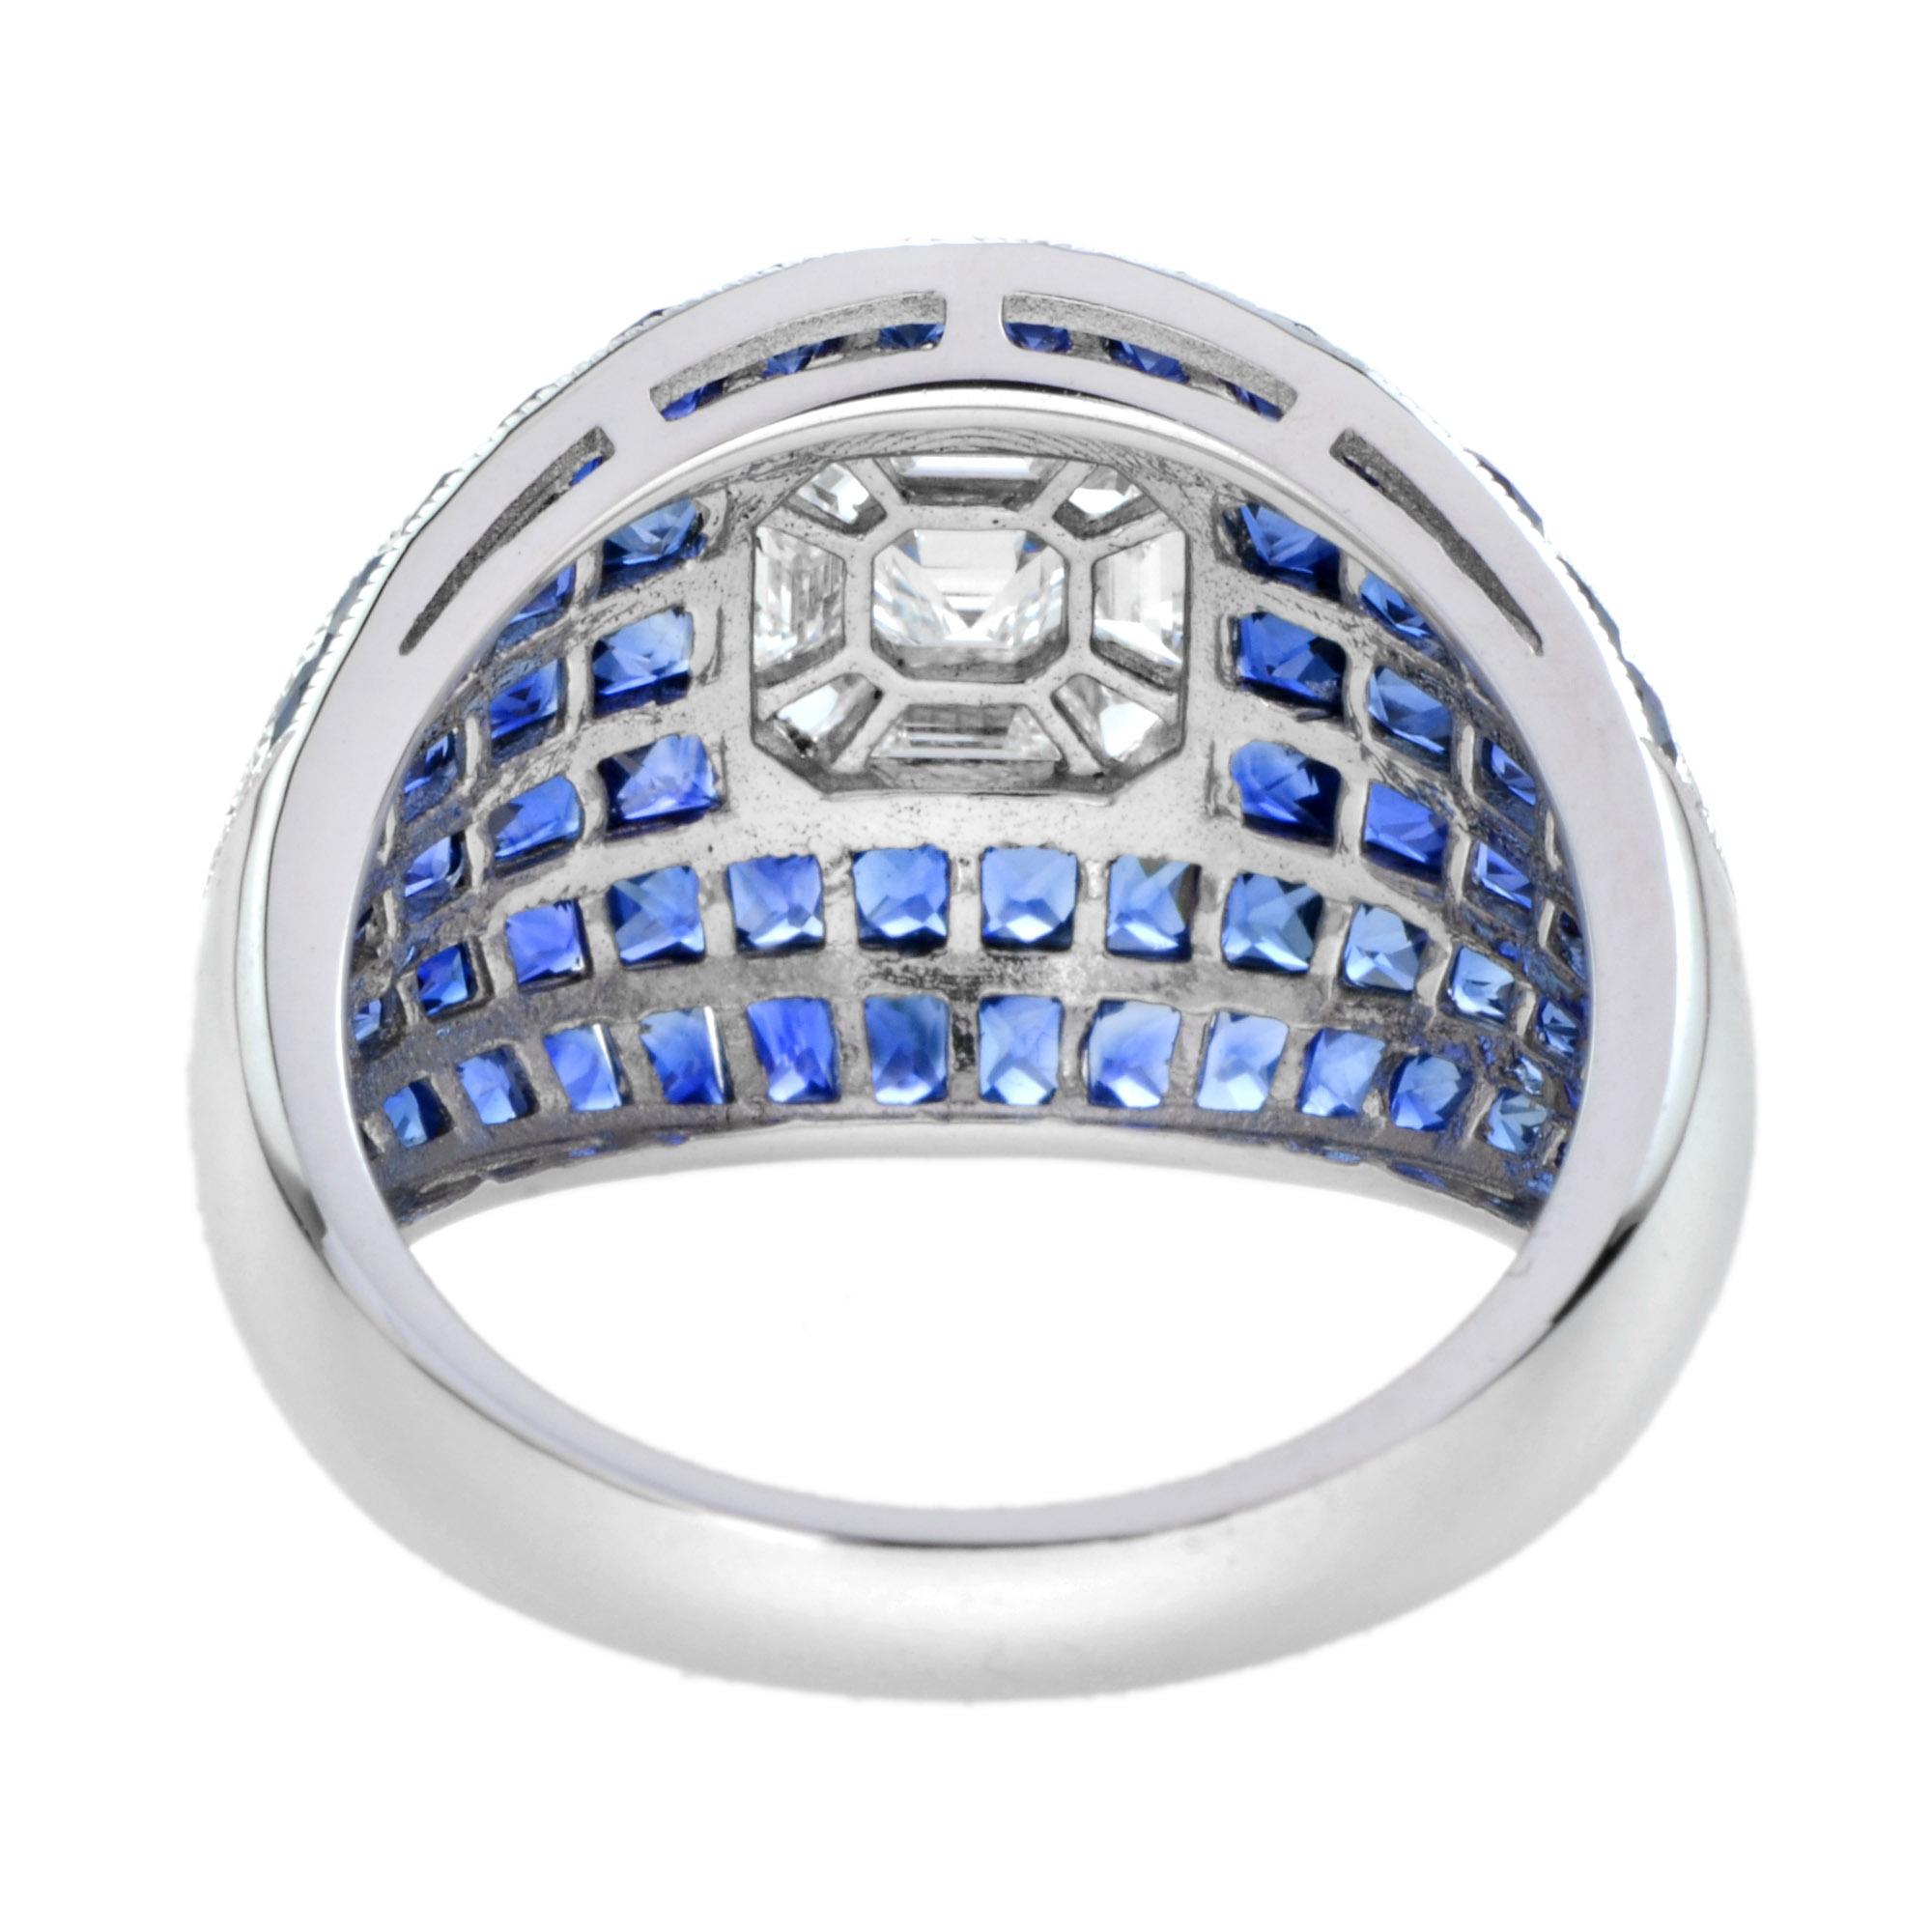 Art Deco Illusion Set Asscher Cut Diamond and Blue Sapphire Bombay Ring in 18K White Gold